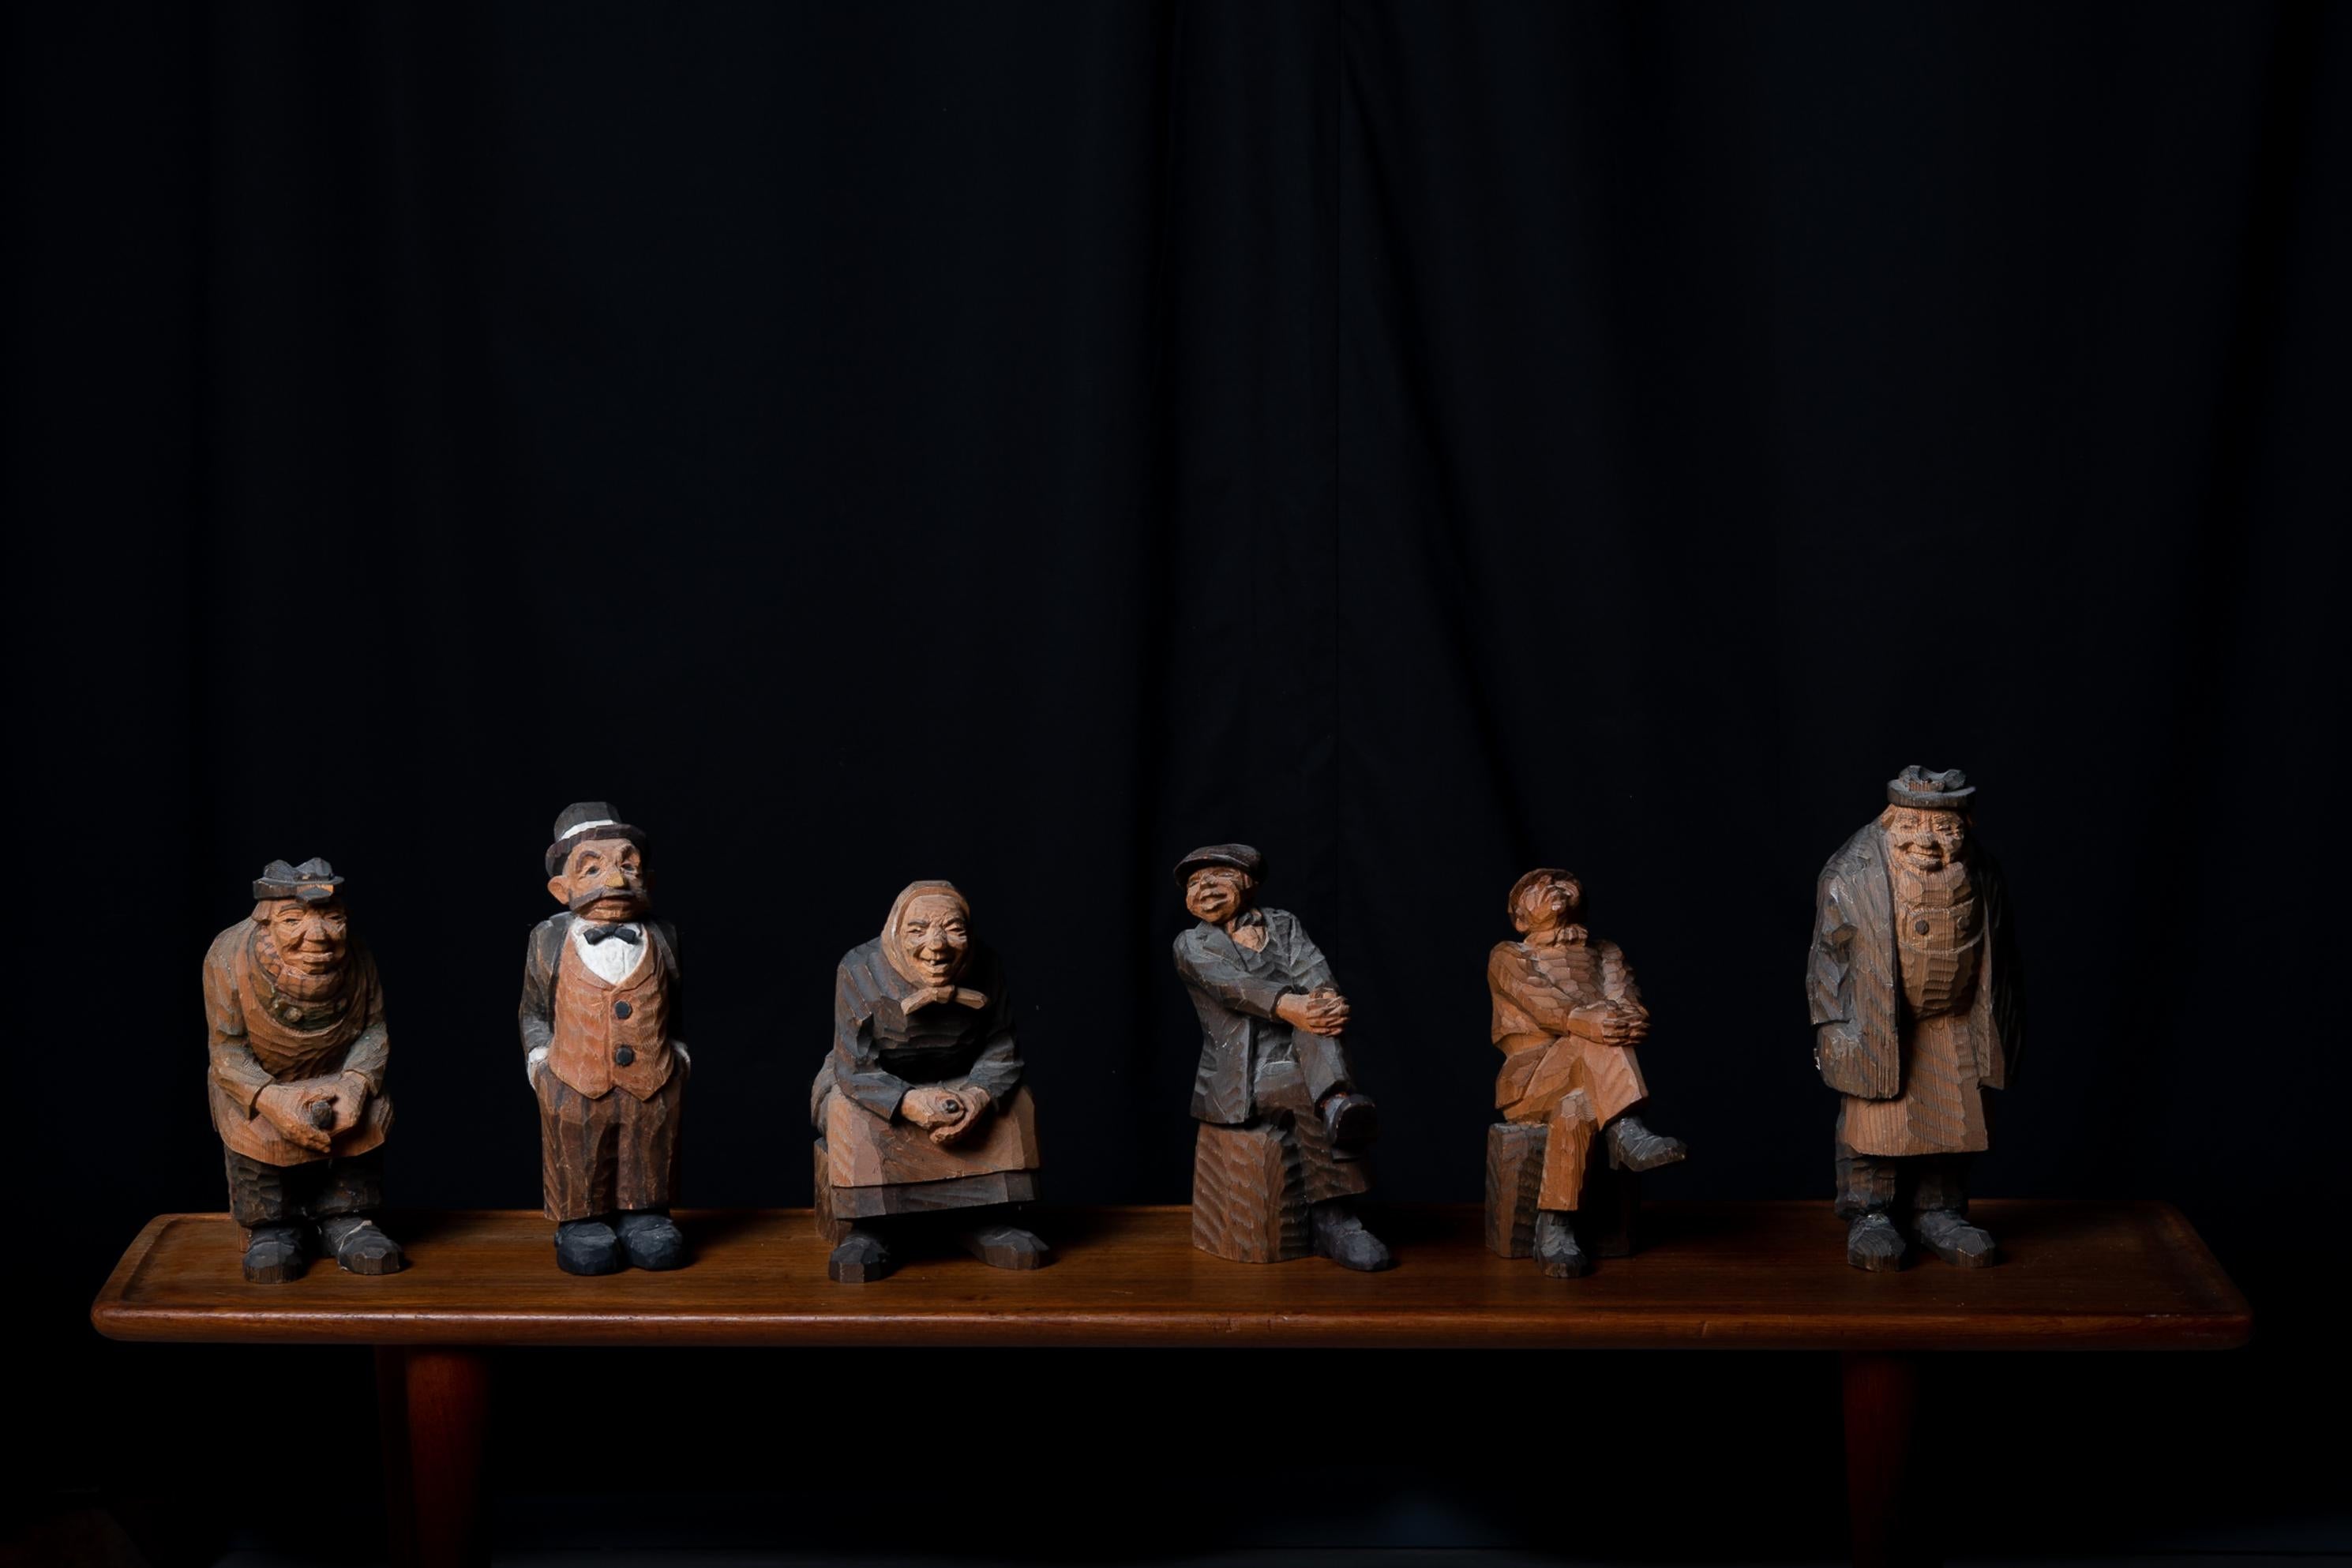 Charming hand-carved wooden figurines in folk art from northern Sweden. The set of 6 figurines are made by hand in solid Swedish pine and painted by Myrstens Johan in Järvsö, Hälsingland. They have the signature initials and the dating 1932. Varying